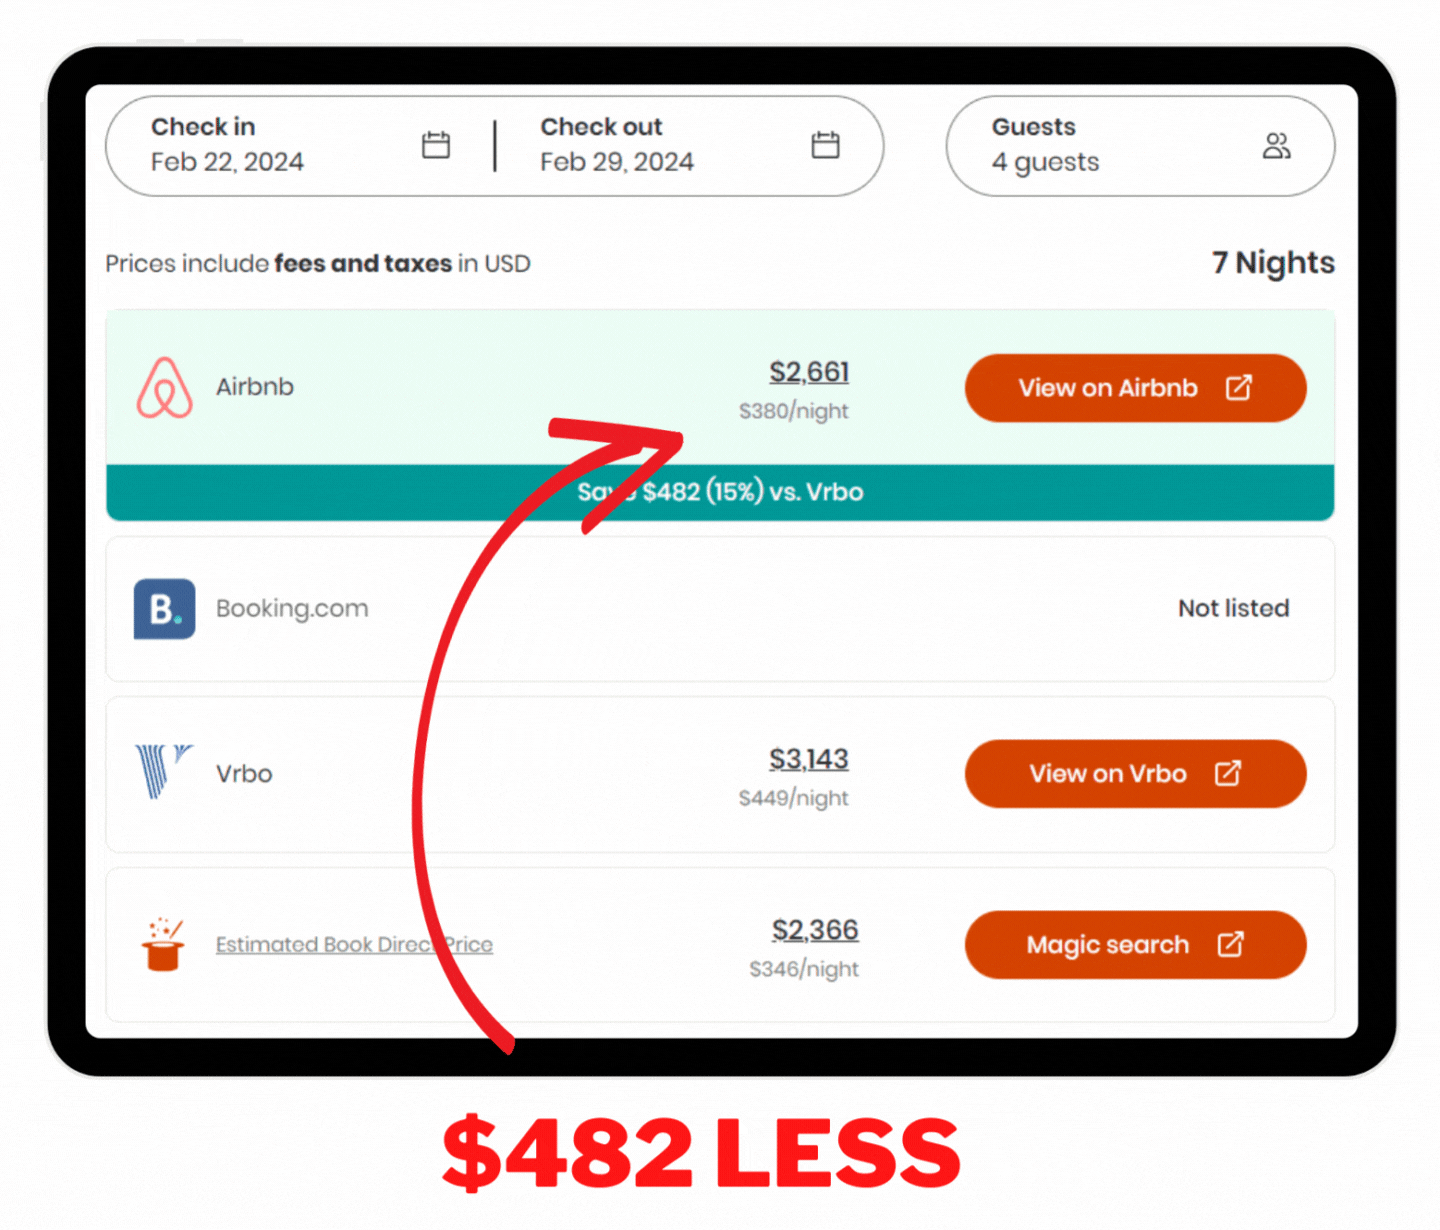 Airbnb Miami Brickell pricing options